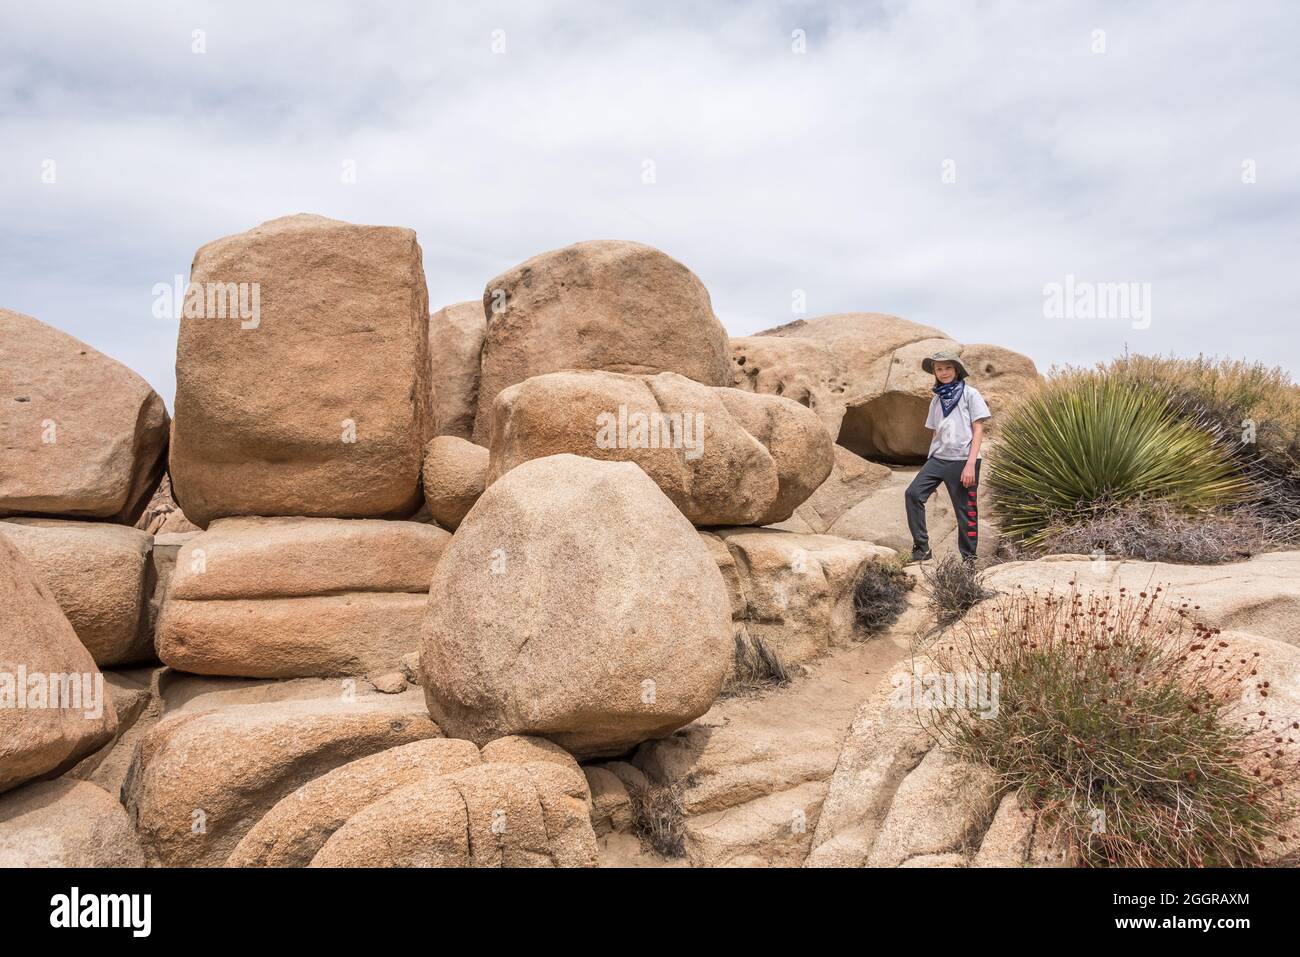 Kids can have great fun bouldering in Hidden Valley at Joshua Tree National Park. Stock Photo